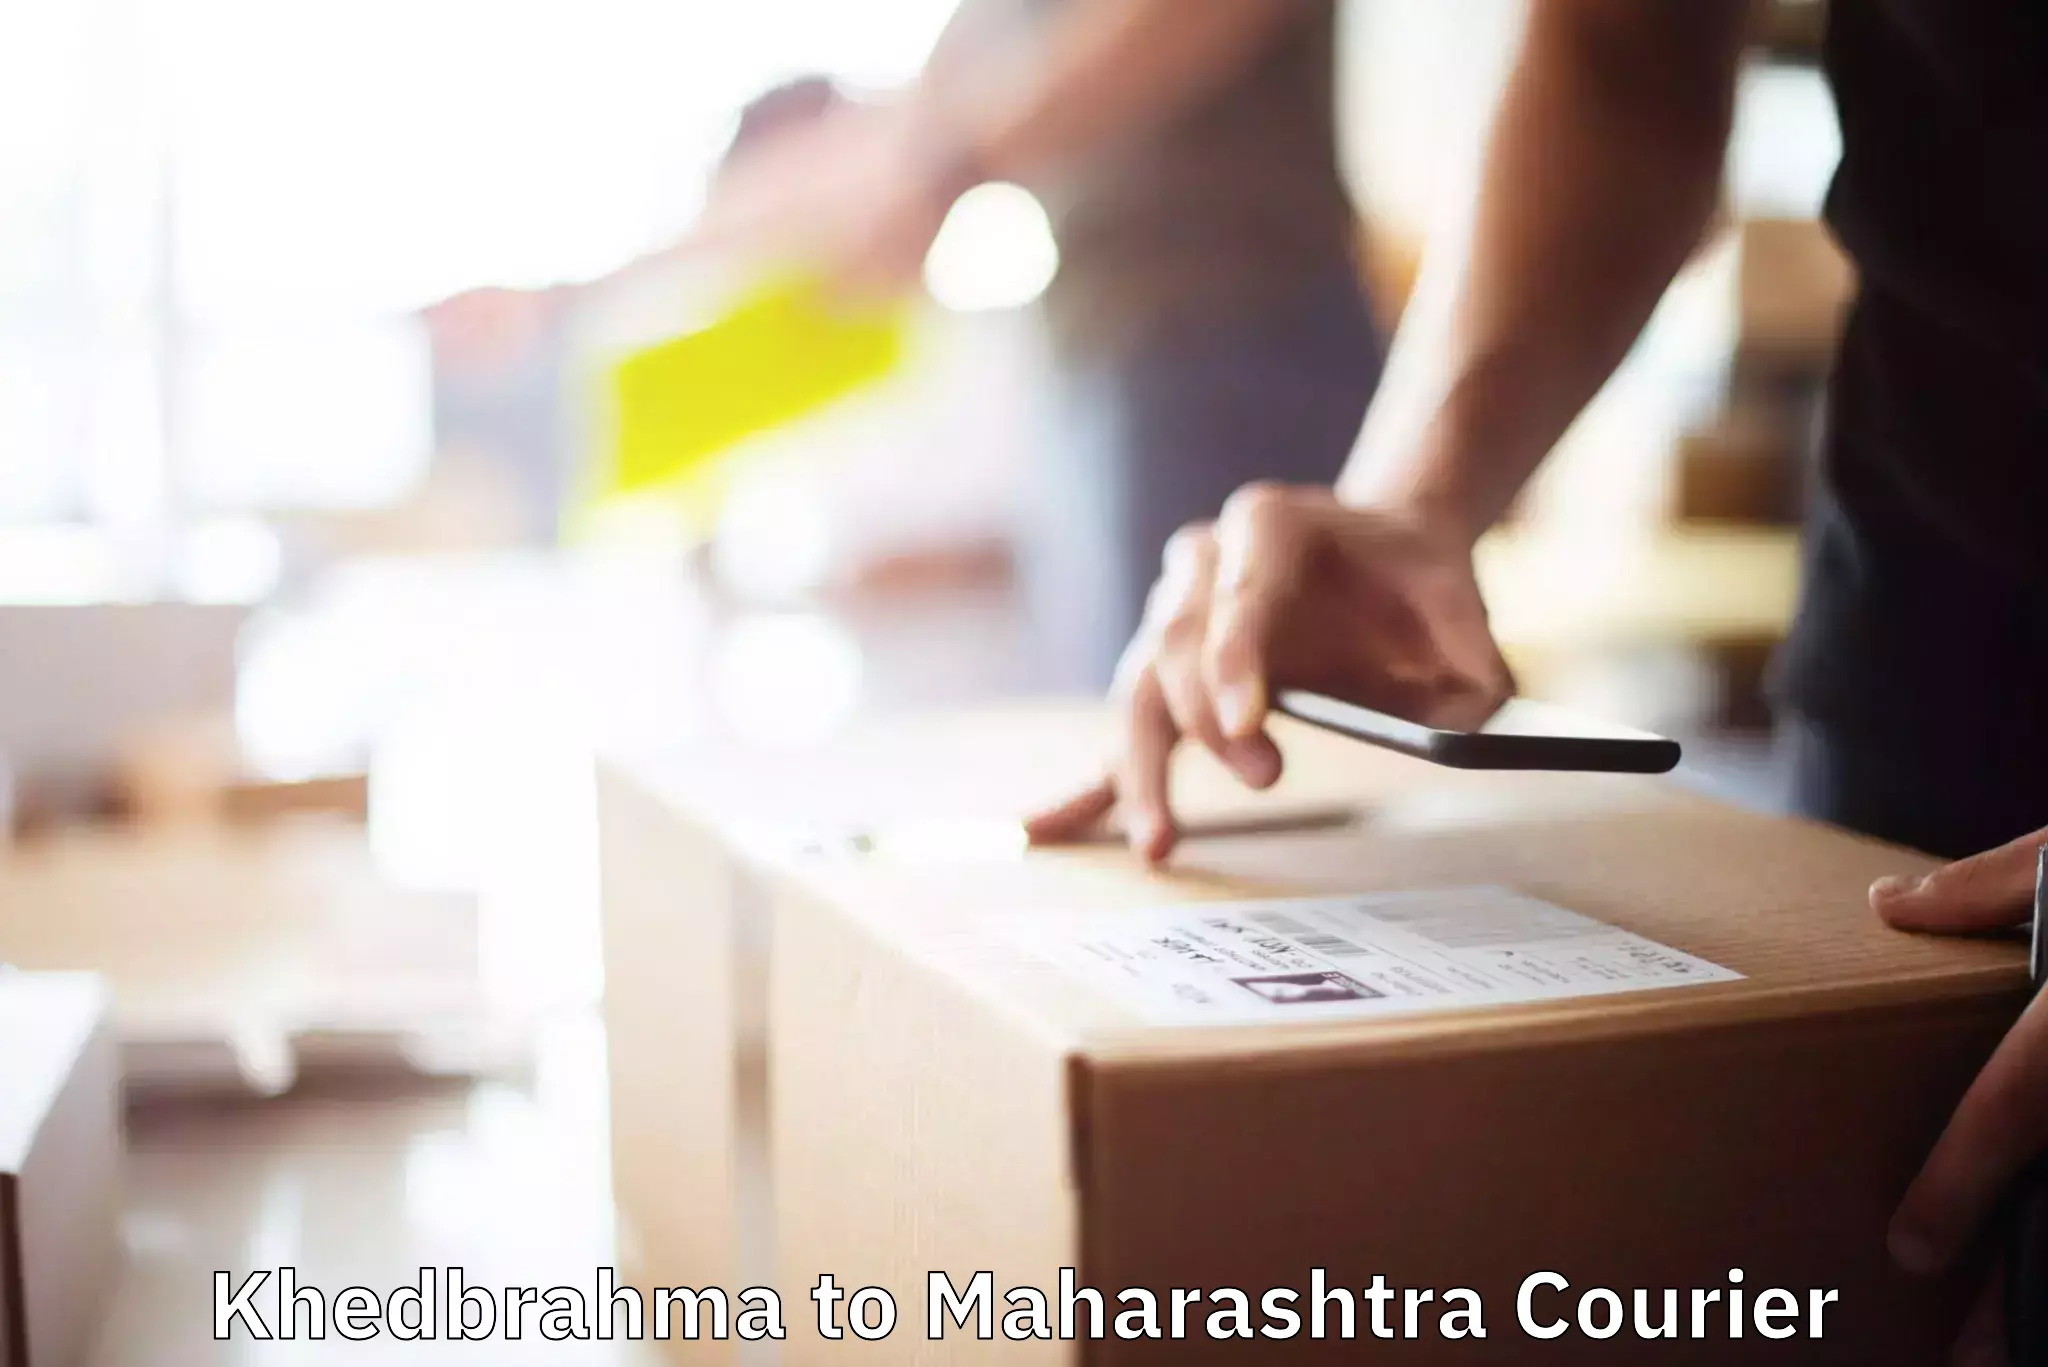 High-quality moving services in Khedbrahma to Osmanabad